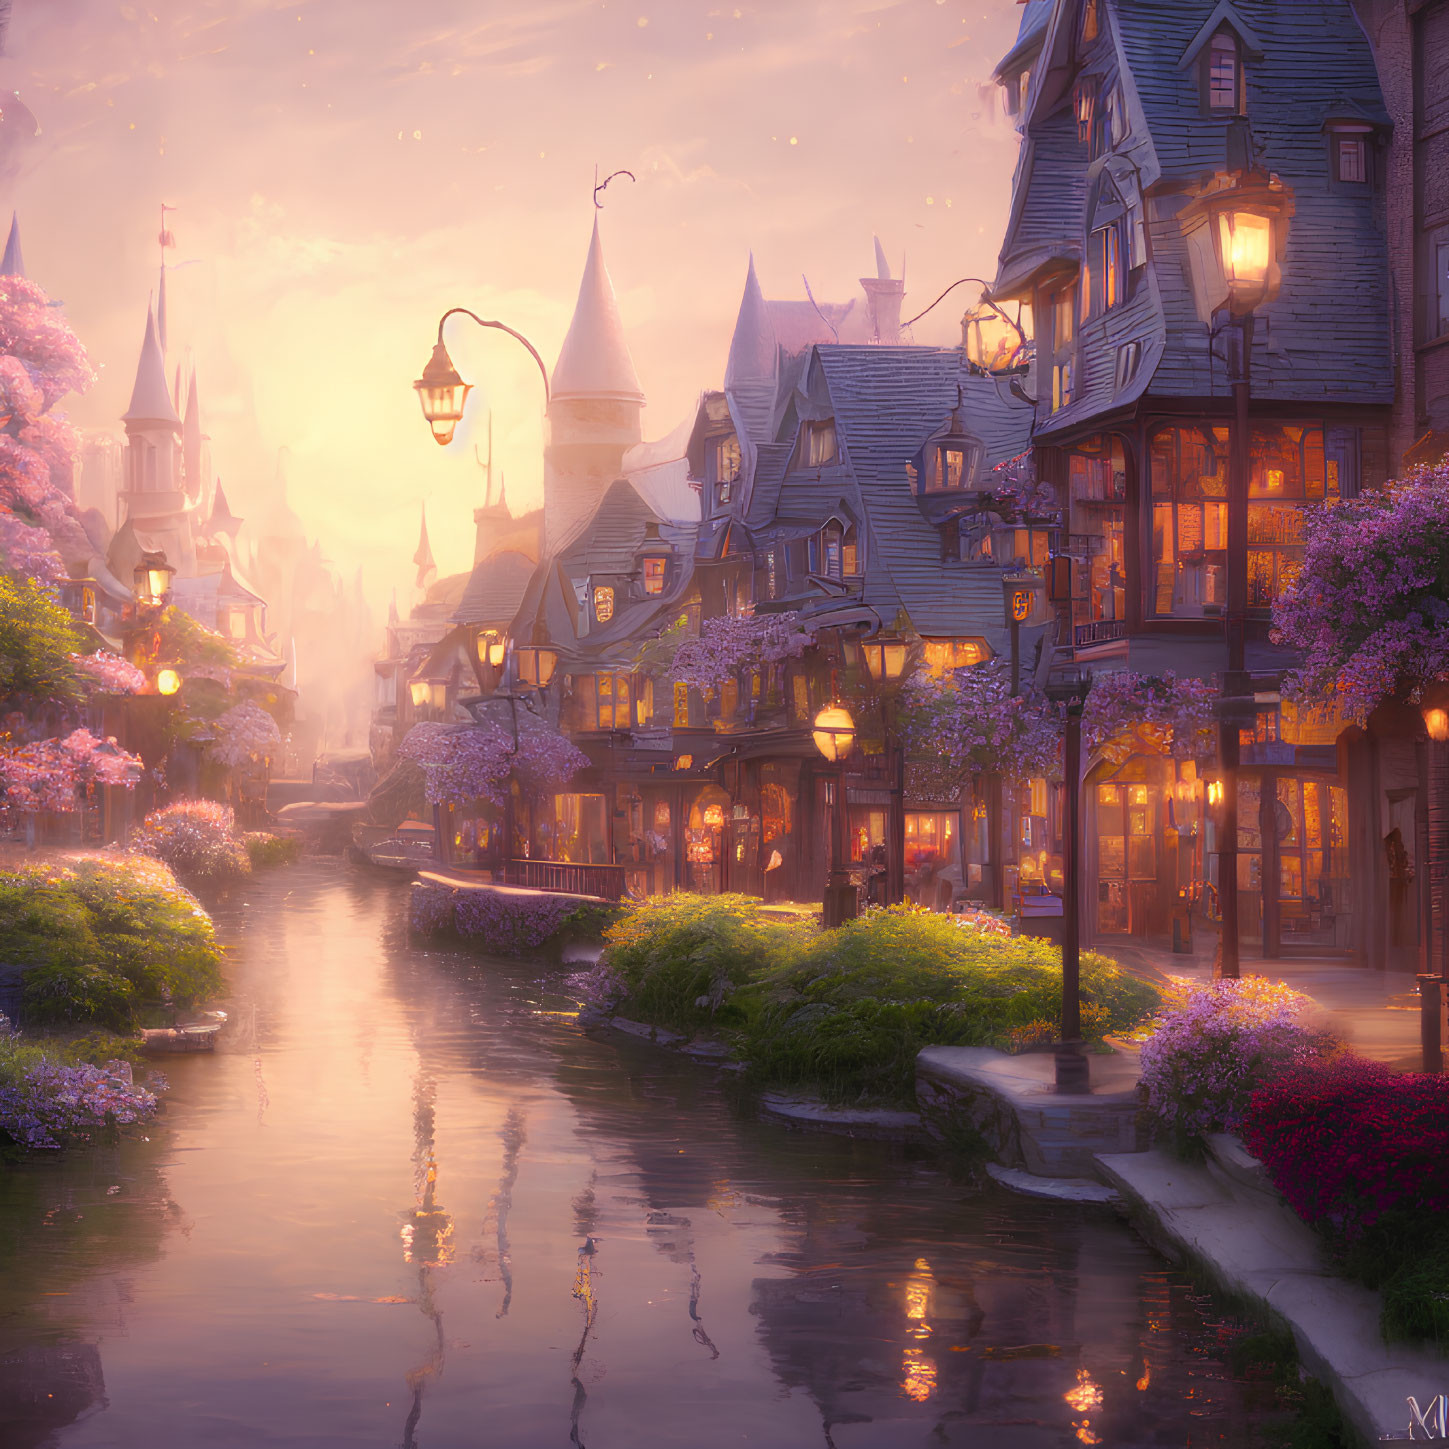 Enchanting fairytale village at twilight with glowing lanterns